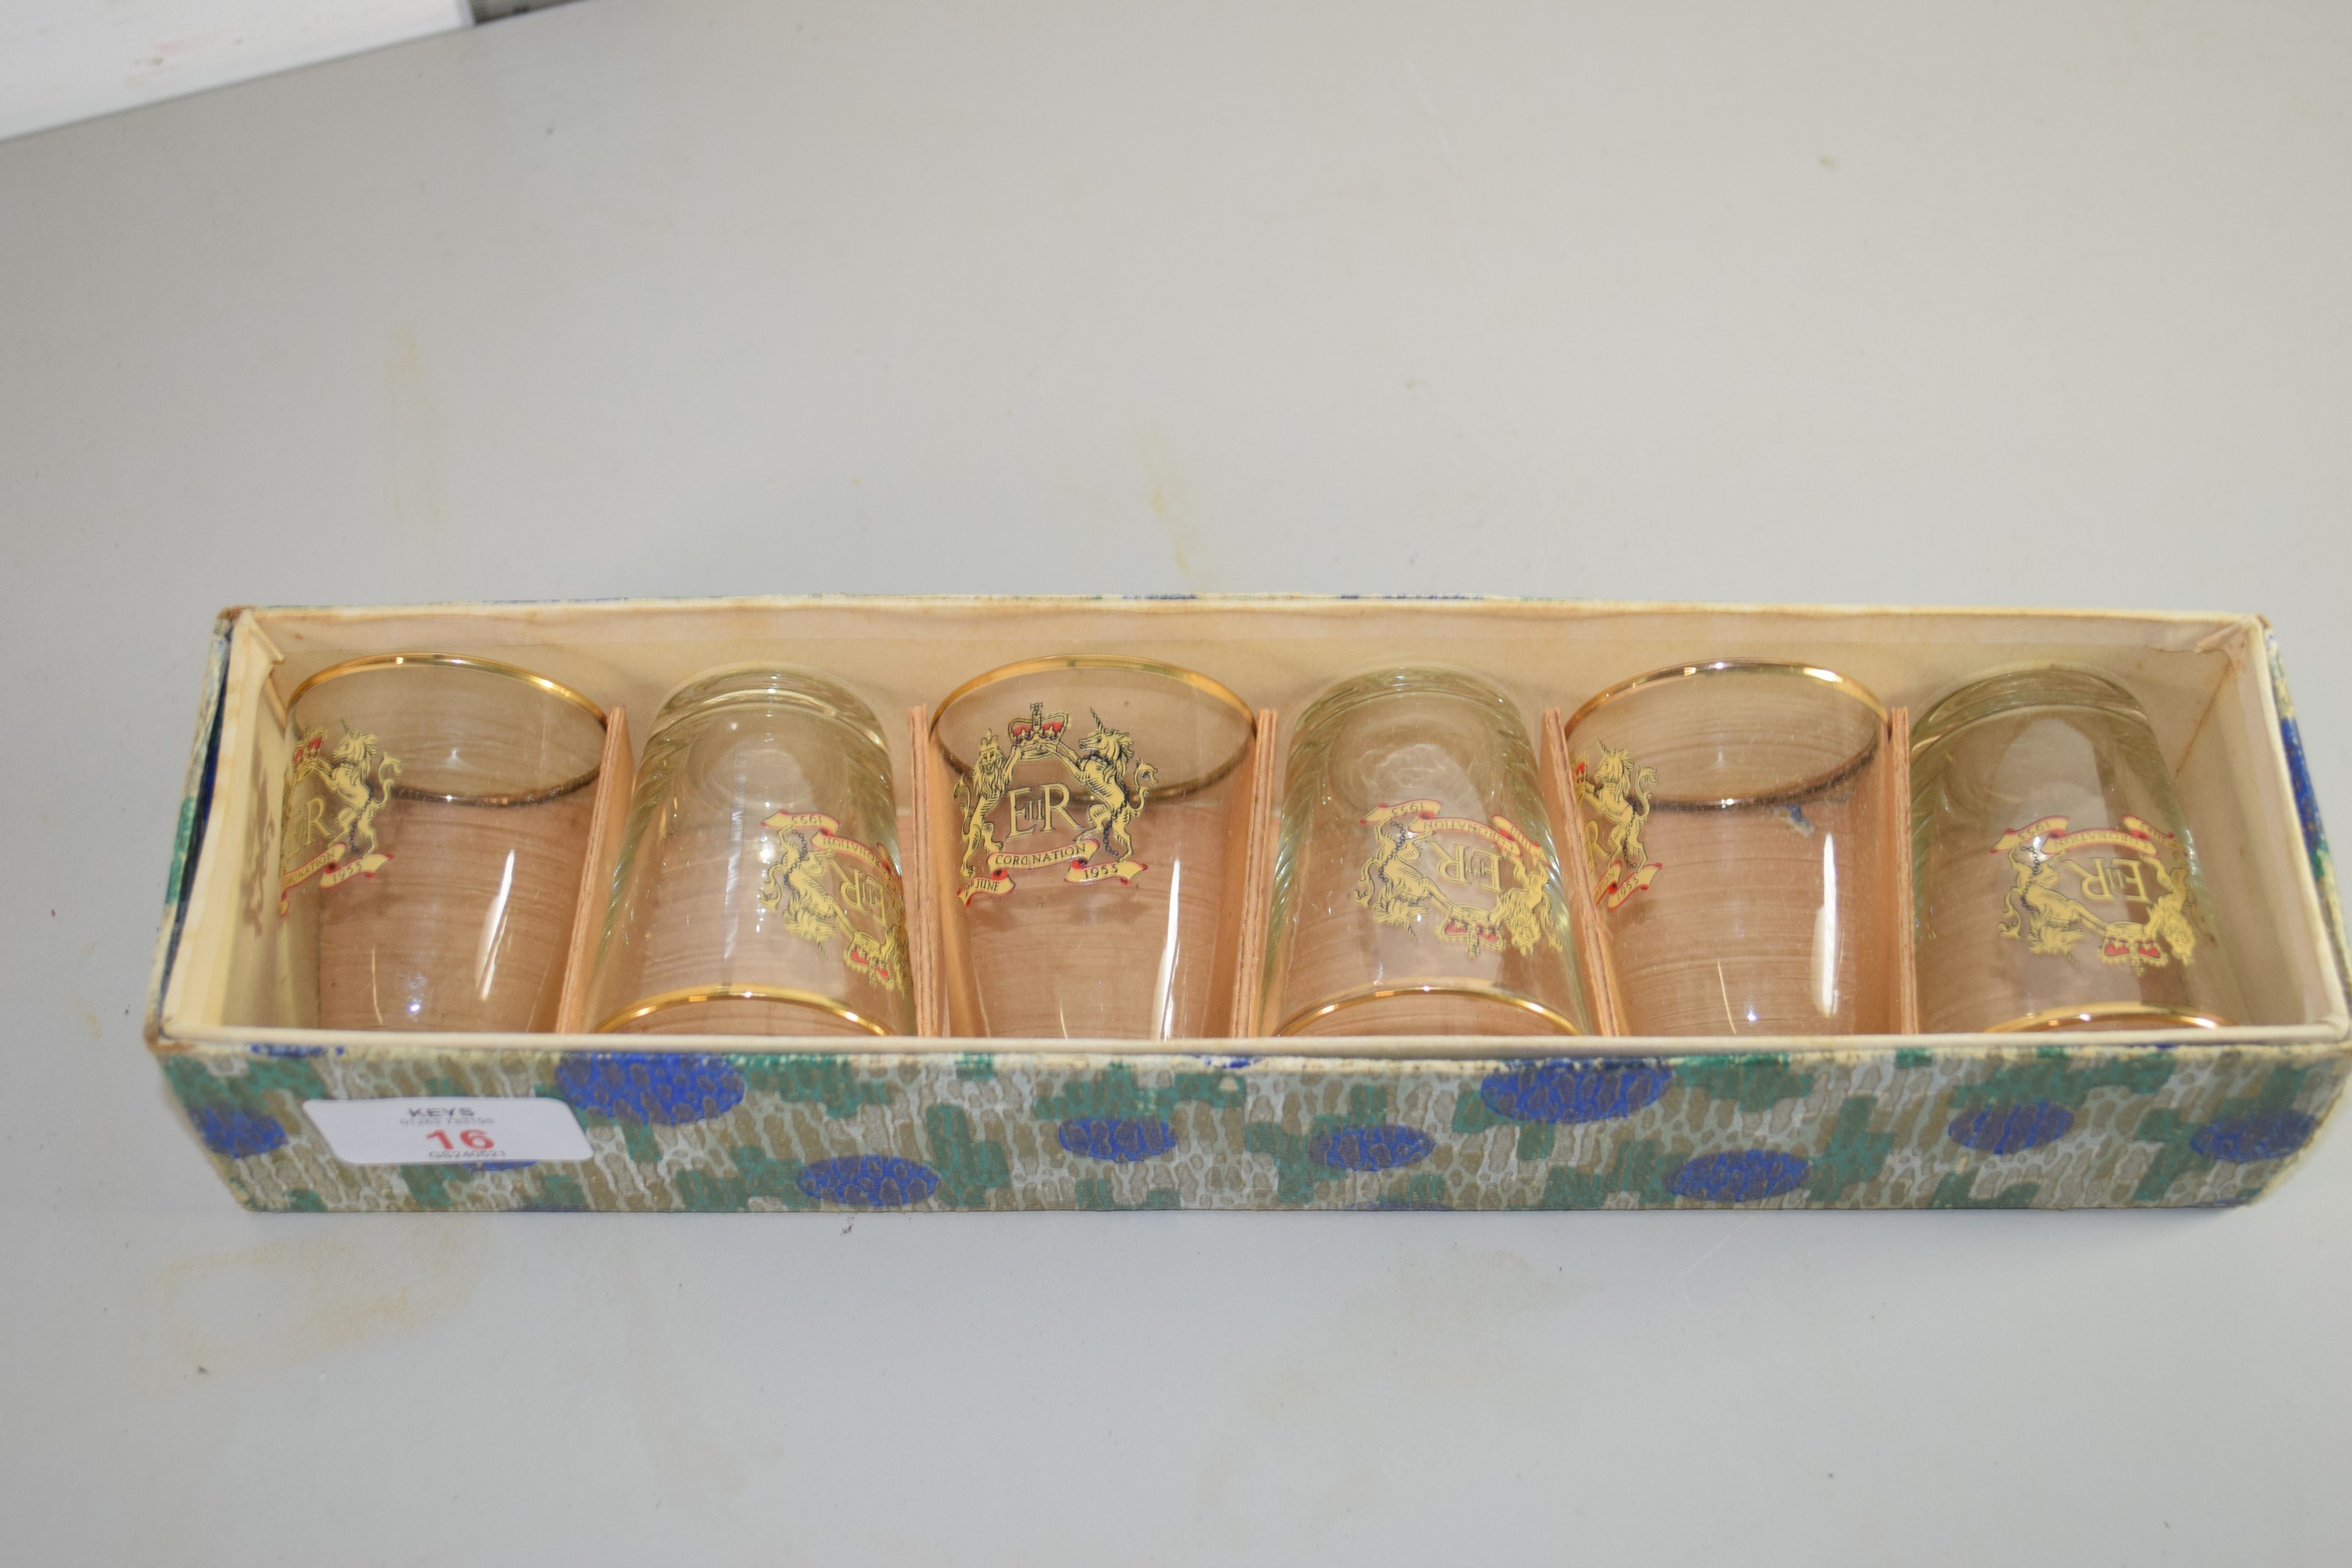 BOX CONTAINING SIX SMALL GLASSES ALL DECORATED WITH CORONATION COMMEMORATIVE INSIGNIA FOR CORONATION